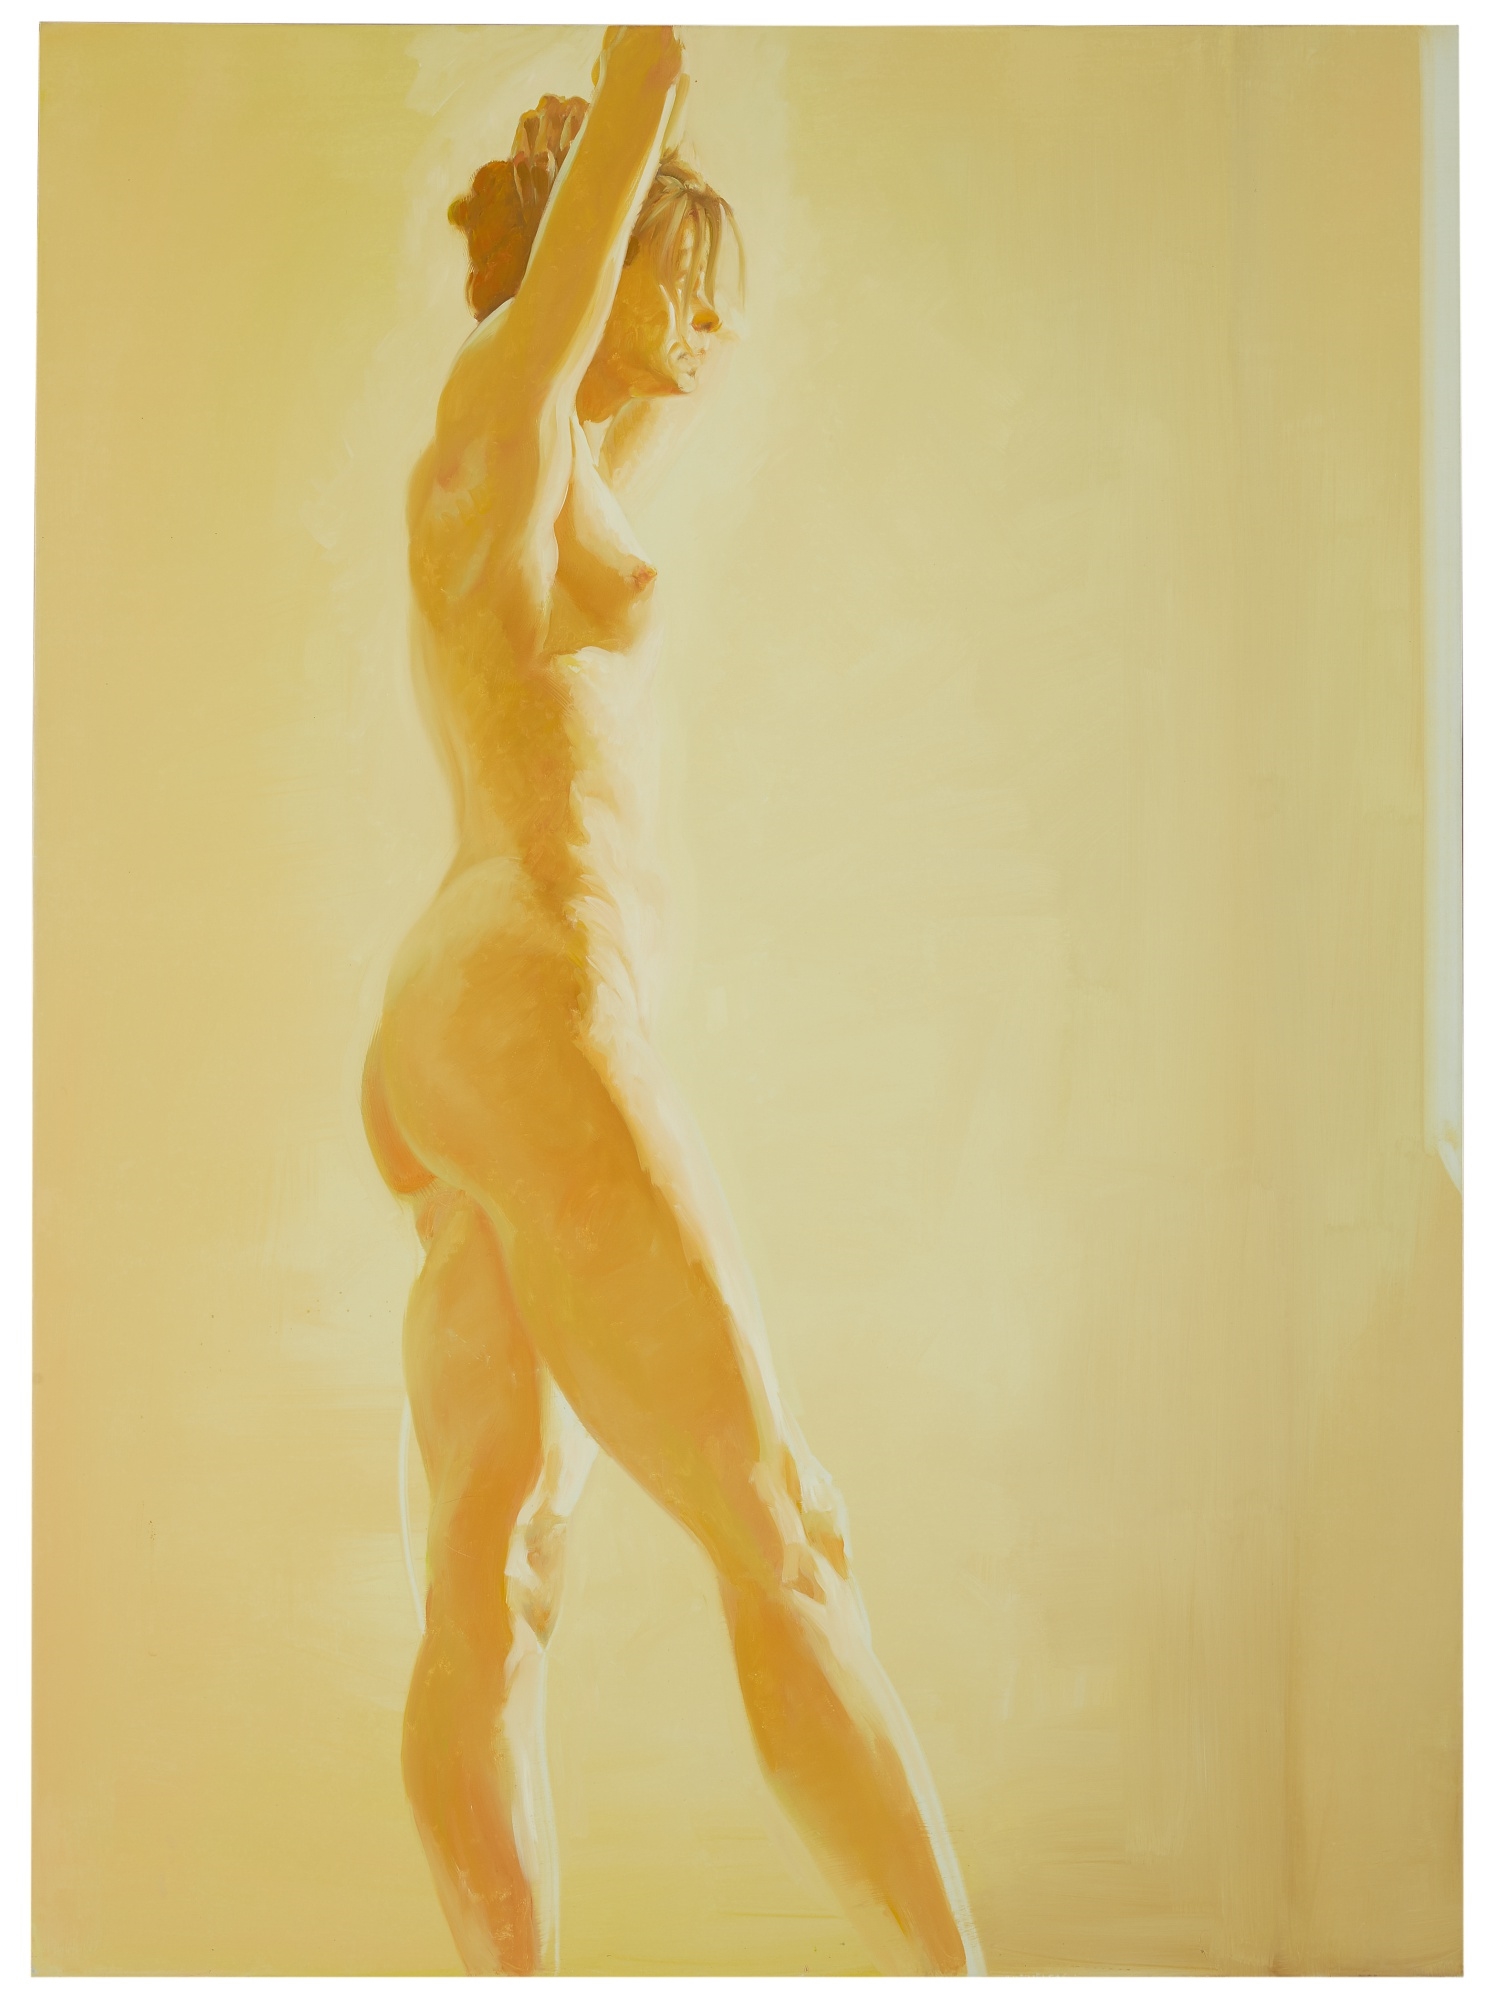 UNTITLED by Eric Fischl, 1995